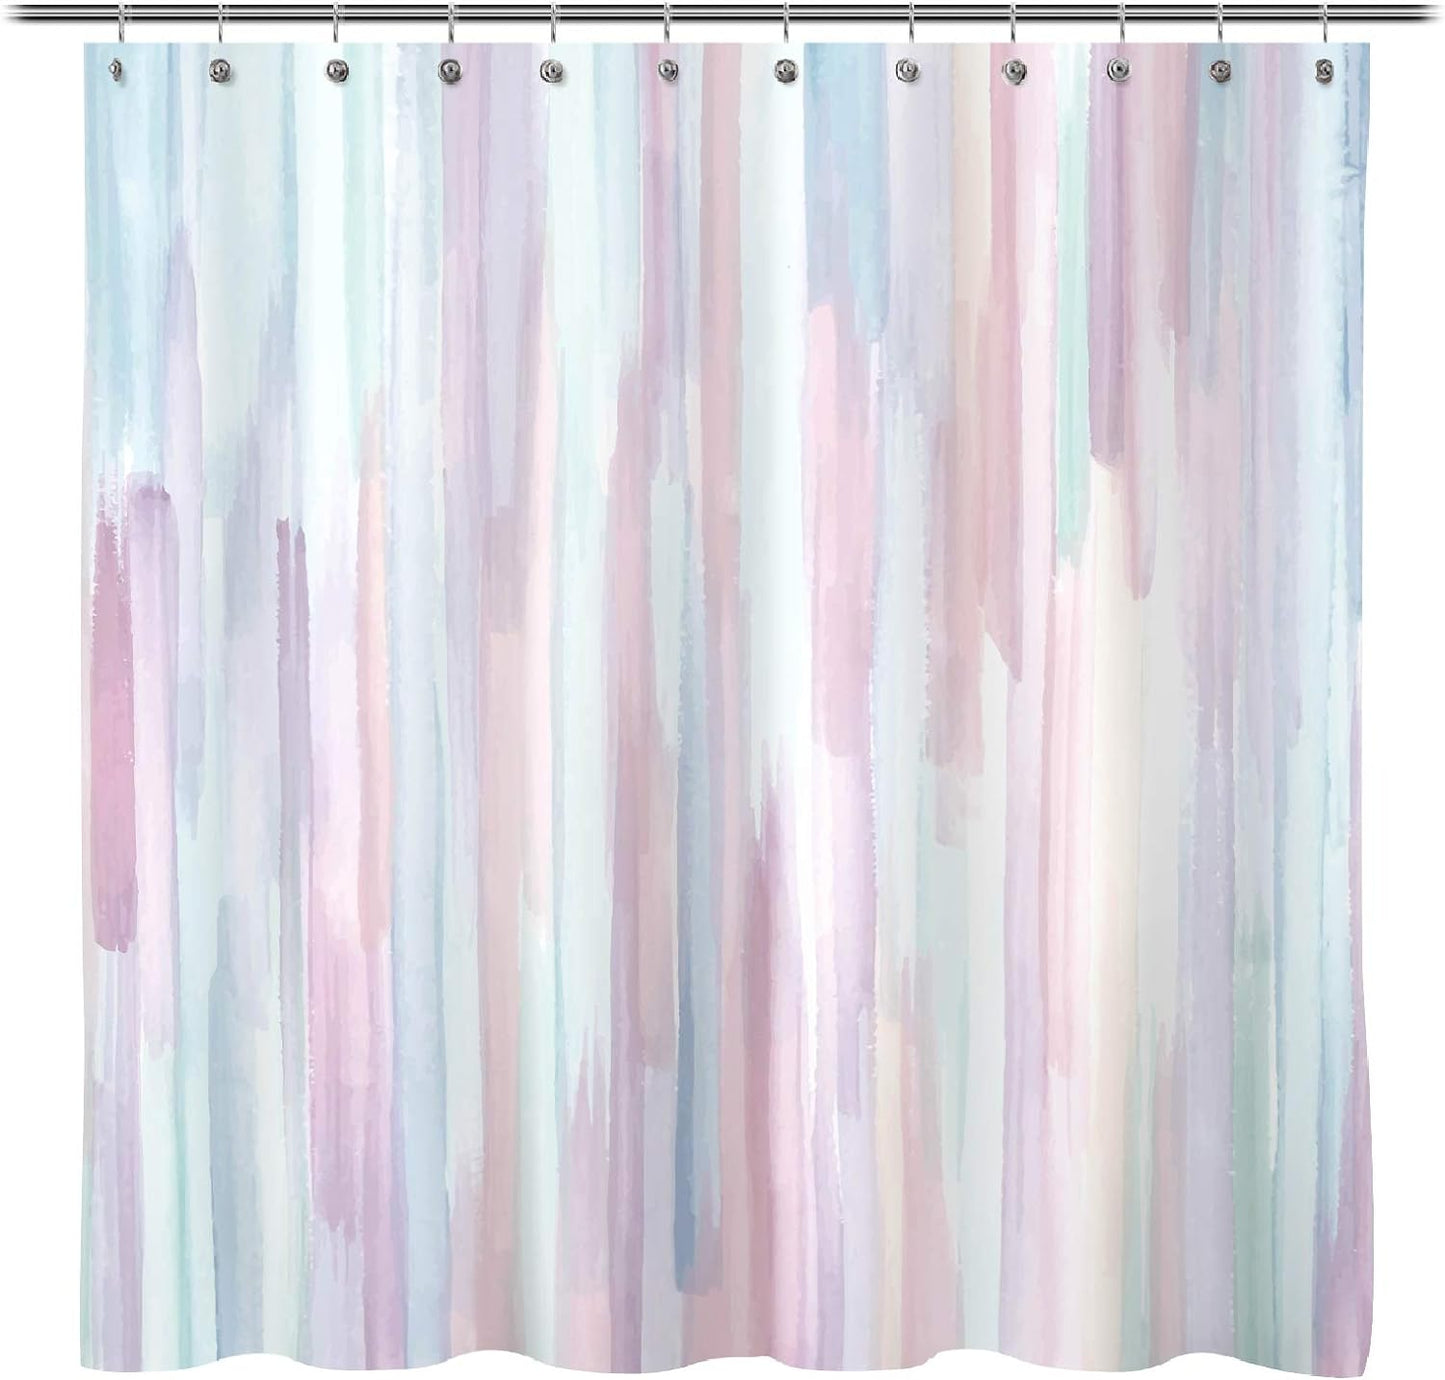 Sunlit Design Watercolor Painting with Macaron Pink and Blue Fabric Shower Curtain, Gouache Style Bathroom Decoration Curtains, Machine Washable